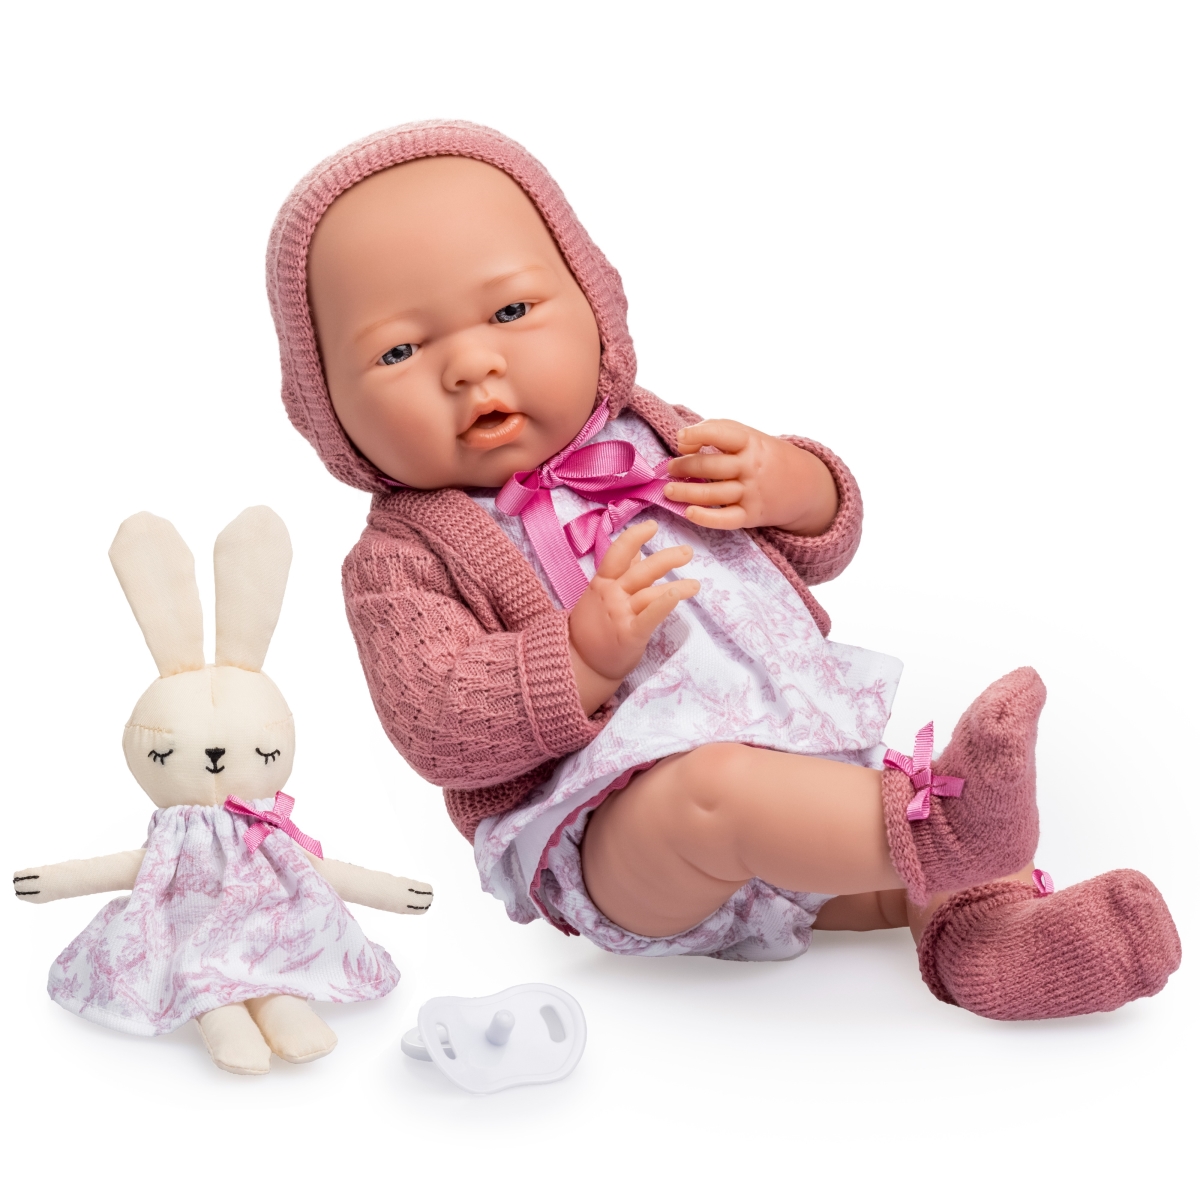 Picture of JC Toys 18067 La Newborn All-Vinyl Baby Doll Set with Accessories, Royal Pink - 15 in.